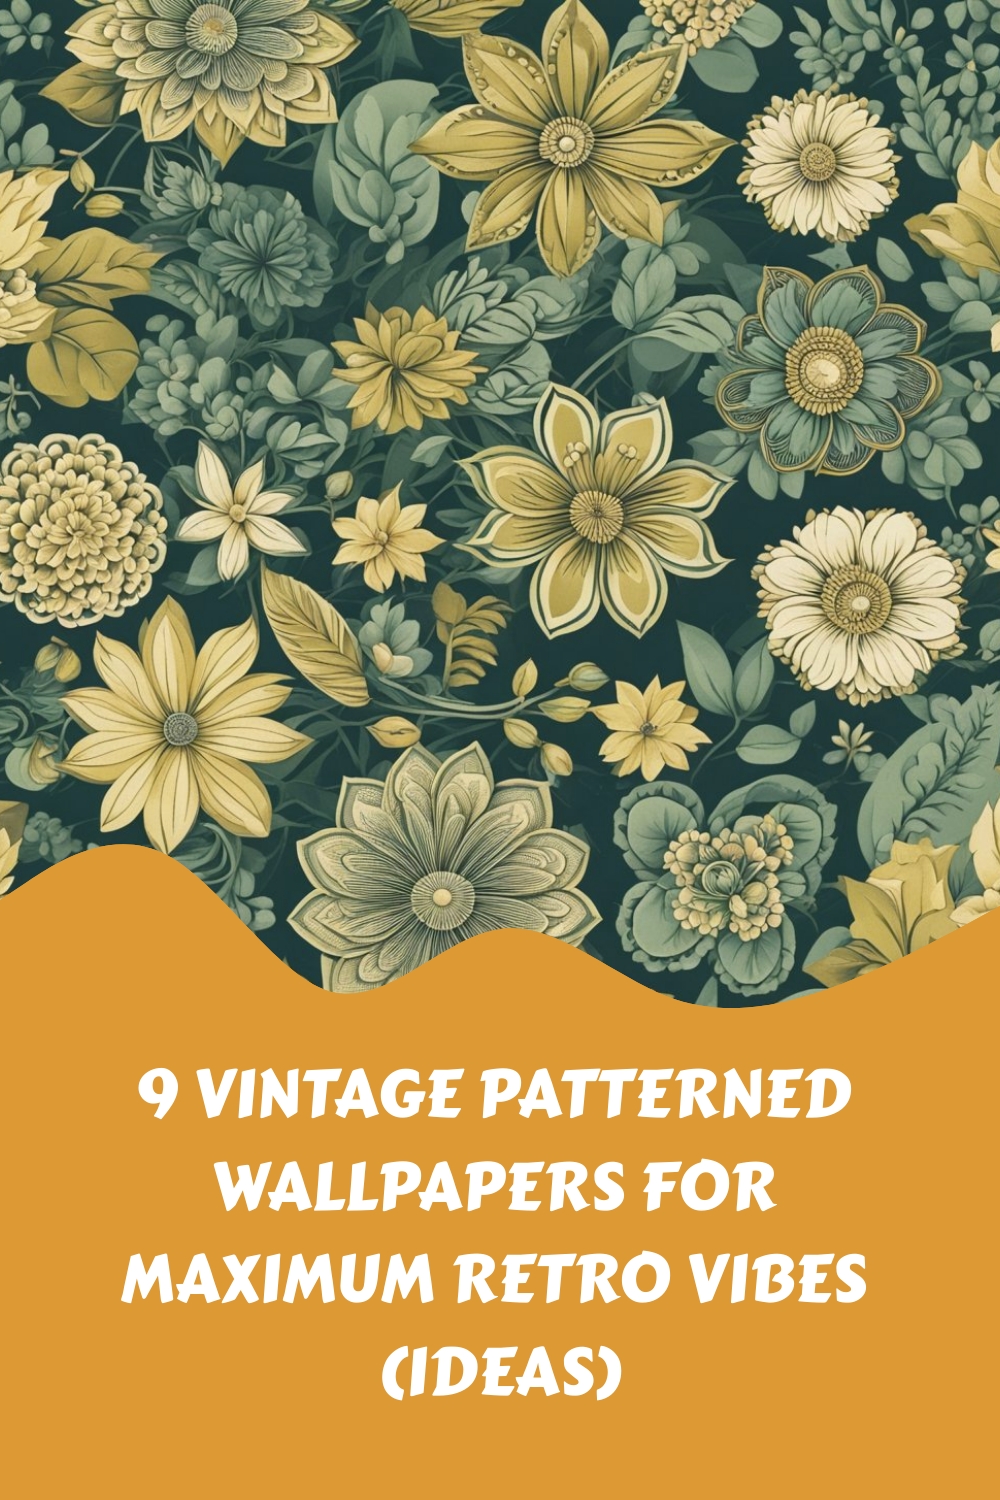 9 Vintage Patterned Wallpapers for Maximum Retro Vibes Ideas generated pin 159658